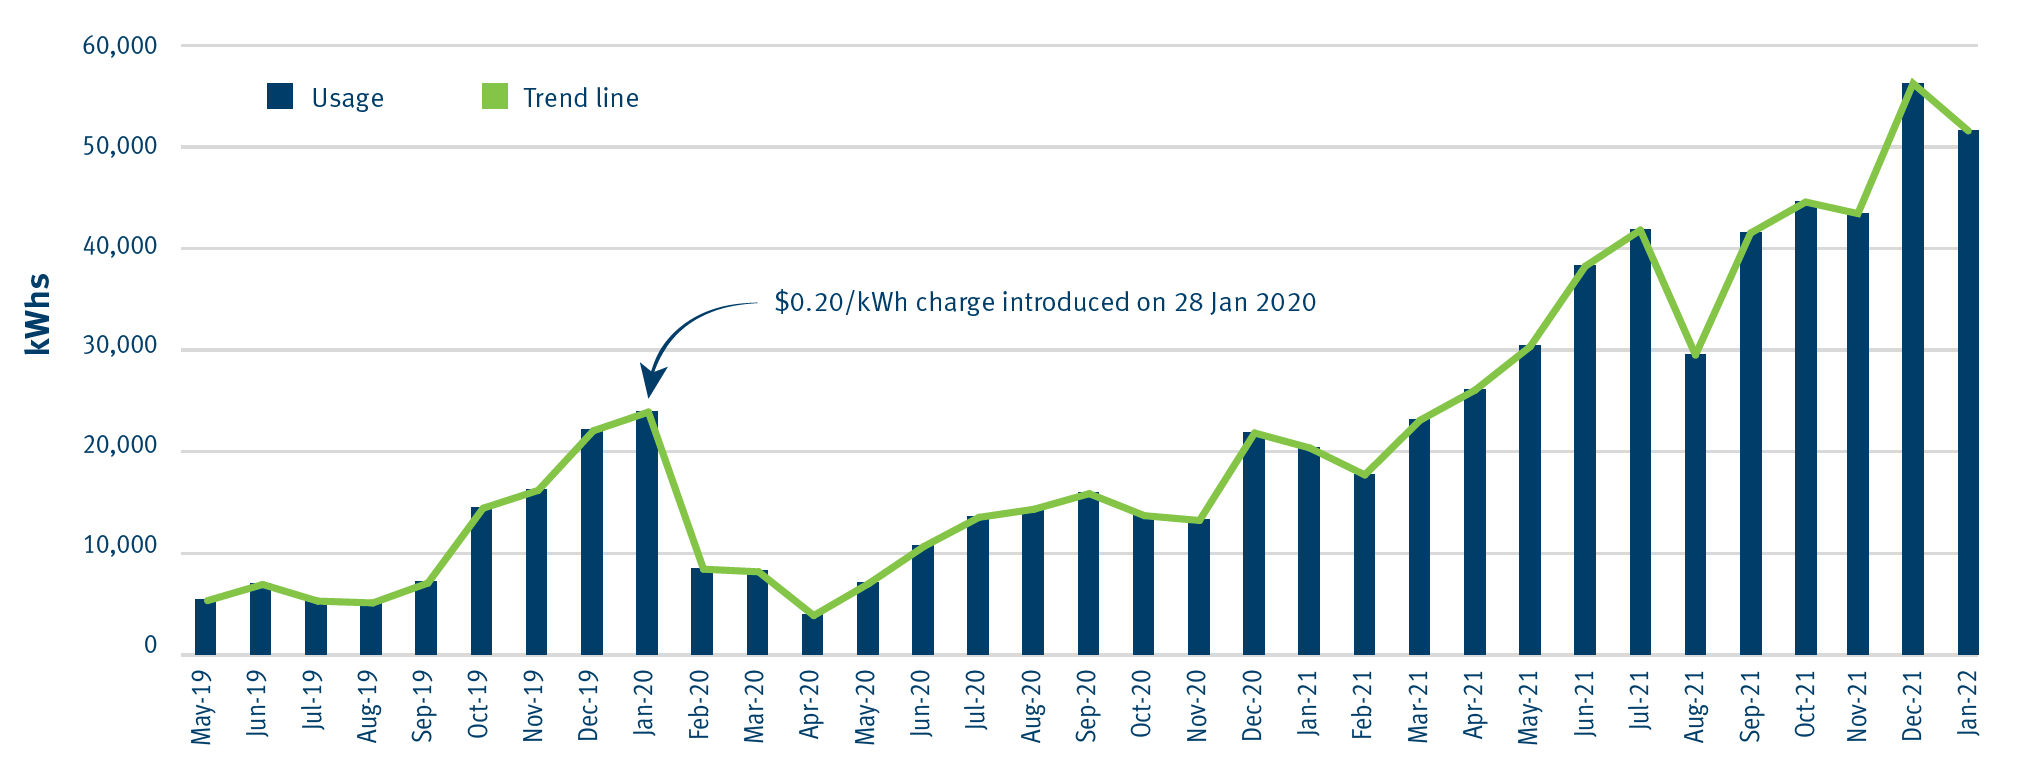 Graph showing increasing usage of the Queensland electric super highway from 5,437.89 kWh in May 2019 to 52,277.27 kWh in January 2022.